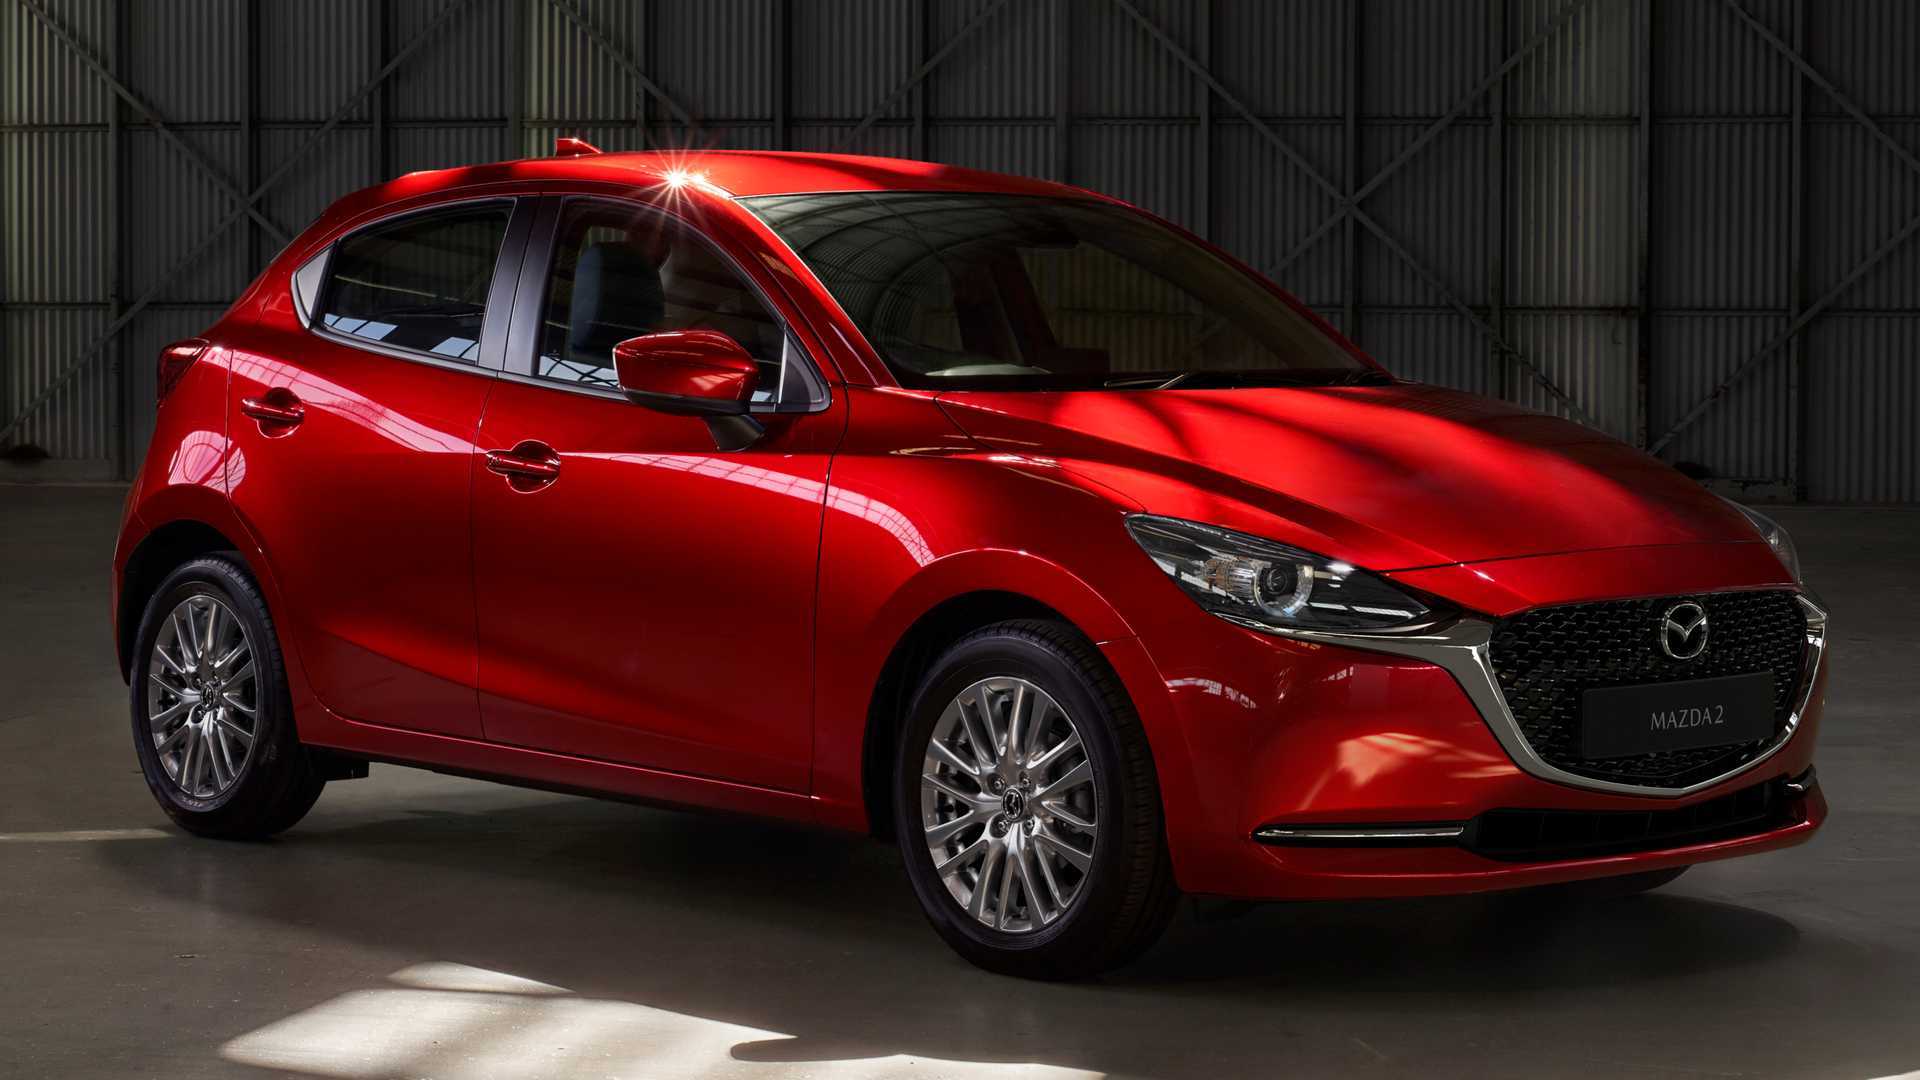 2020 Mazda2 Revealed With More Tech And Refinement